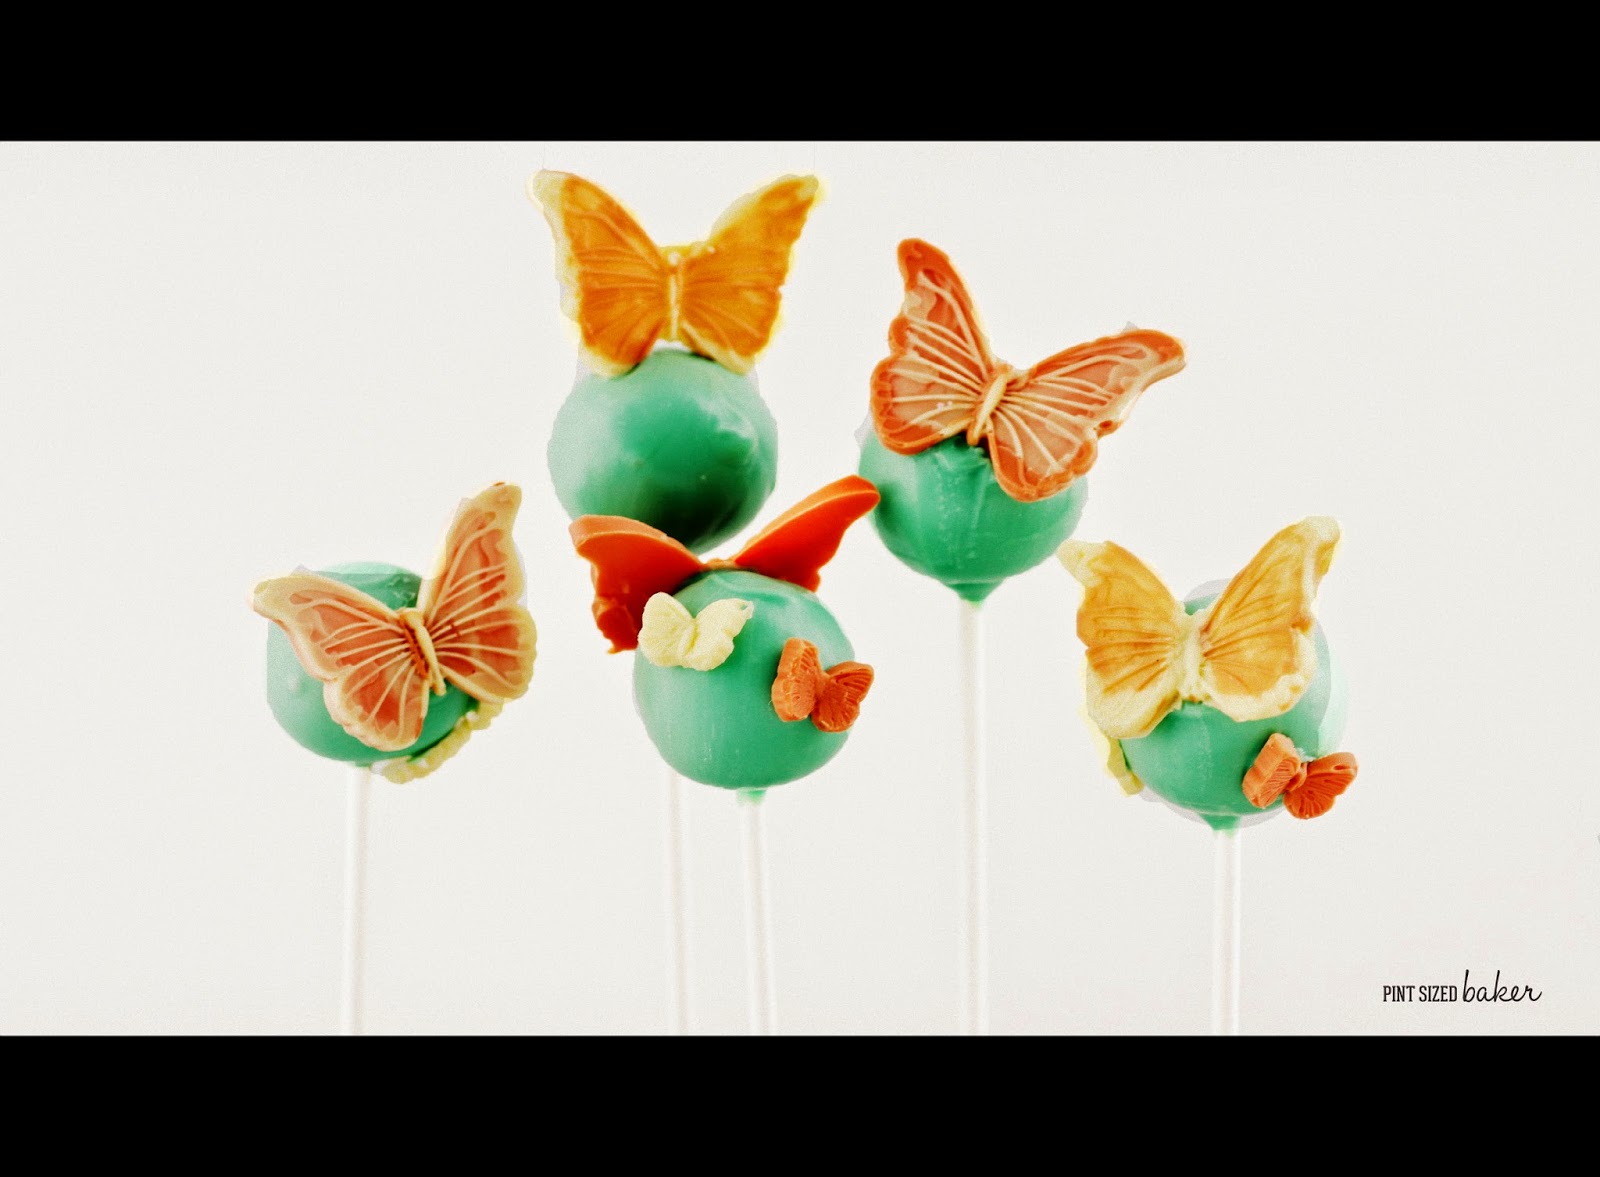 Spring time celebrations aren't complete without Butterfly Cake Pops. You can learn how to make these fun cake pops at home for your garden party.